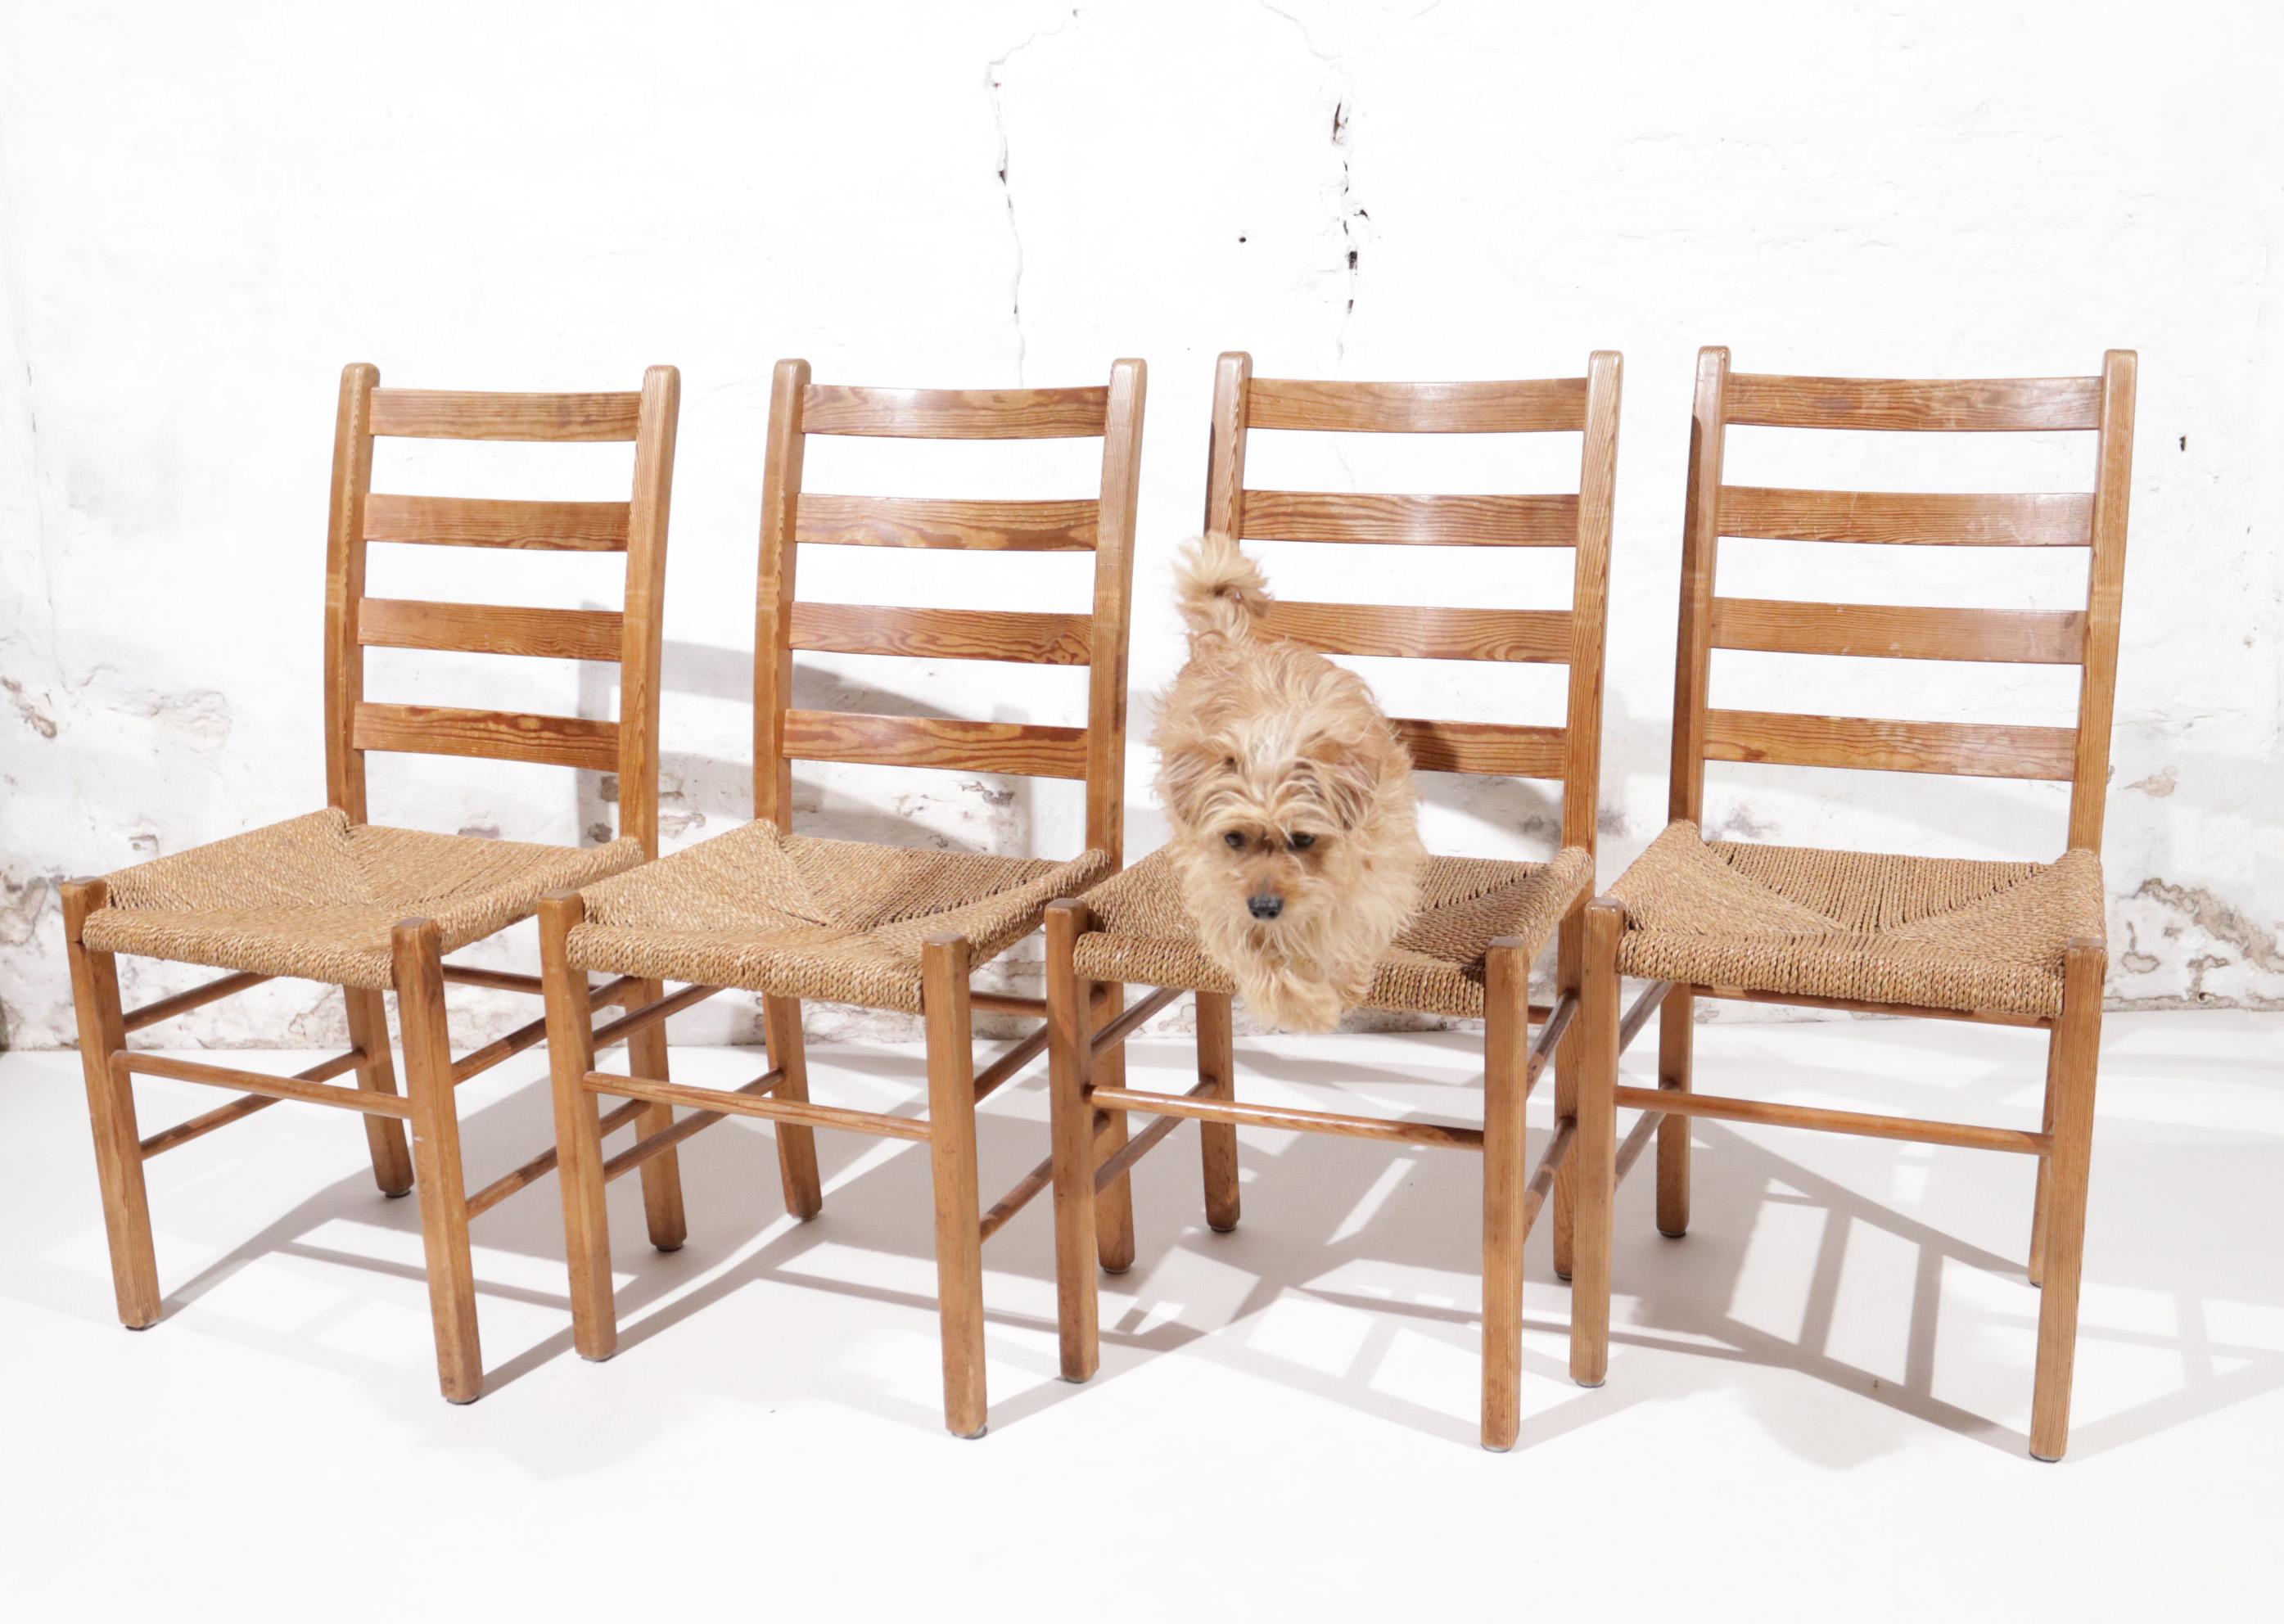 Beautiful chairs from the 60s made of solid oak with a twisted seagrass woven seat.
Fit perfectly with the style of designers such as Charlotte Perriand and Charles Dudouyt.
They are comfortable and have a very nice warm appearance due to the use of